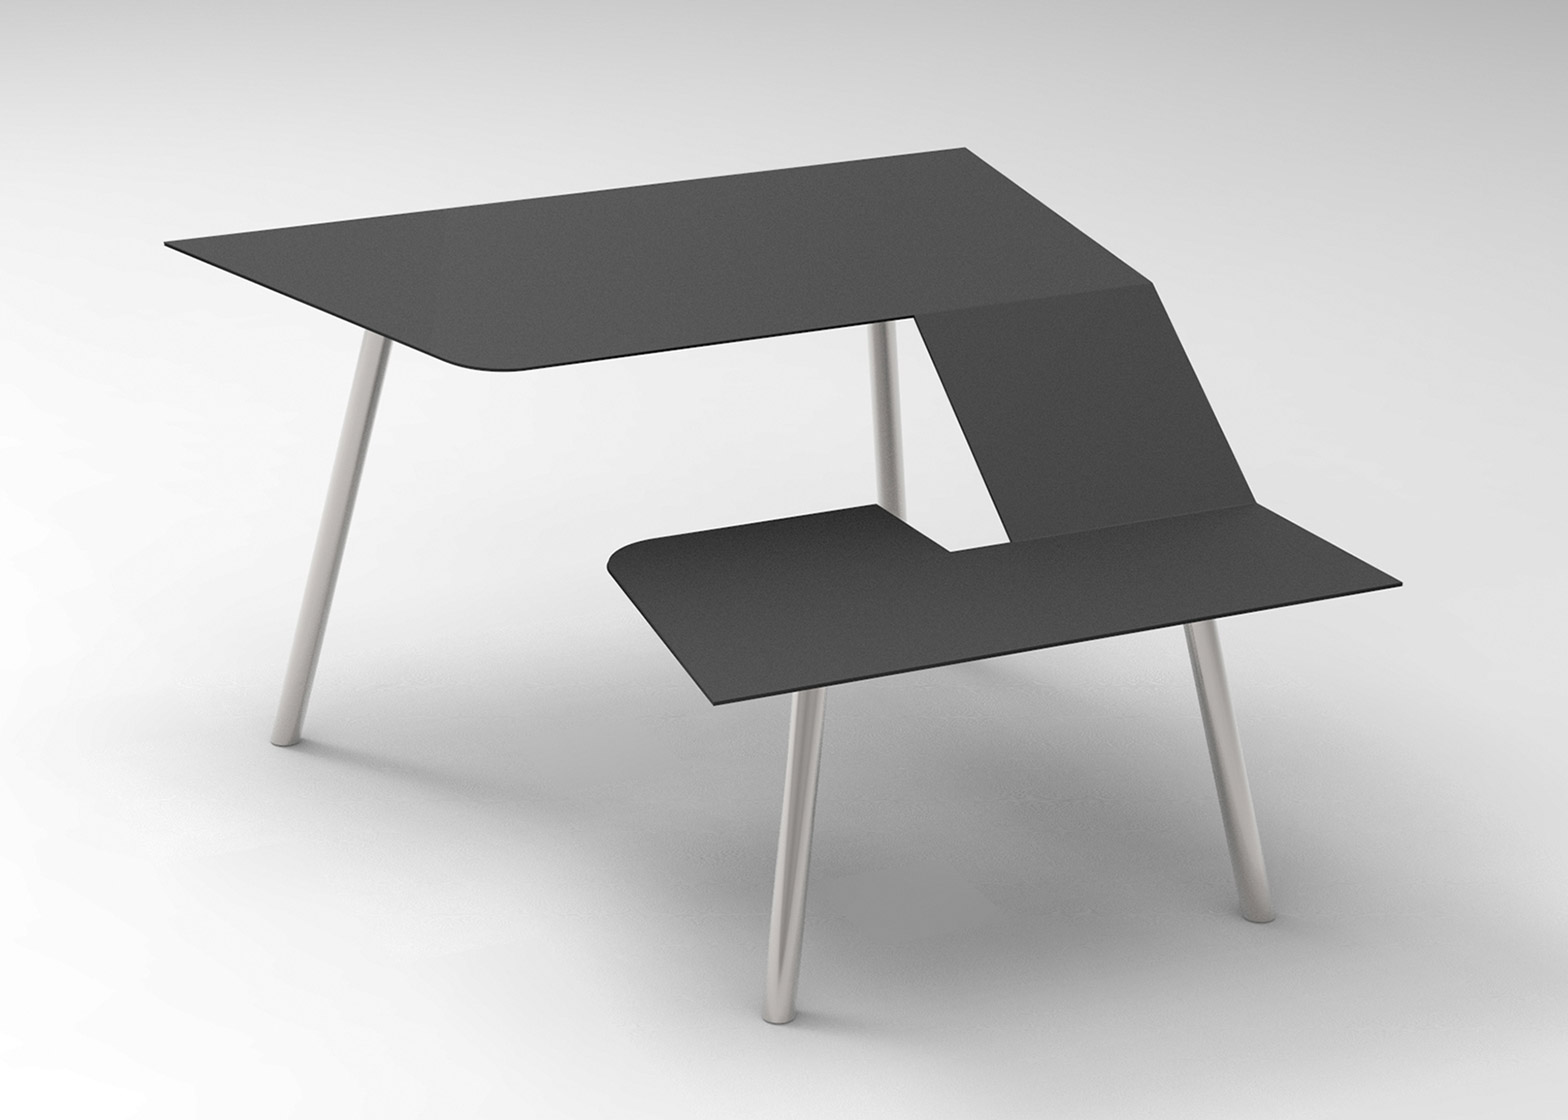 Frans Willigers addresses “useless” work furniture with the Last Writing Desk